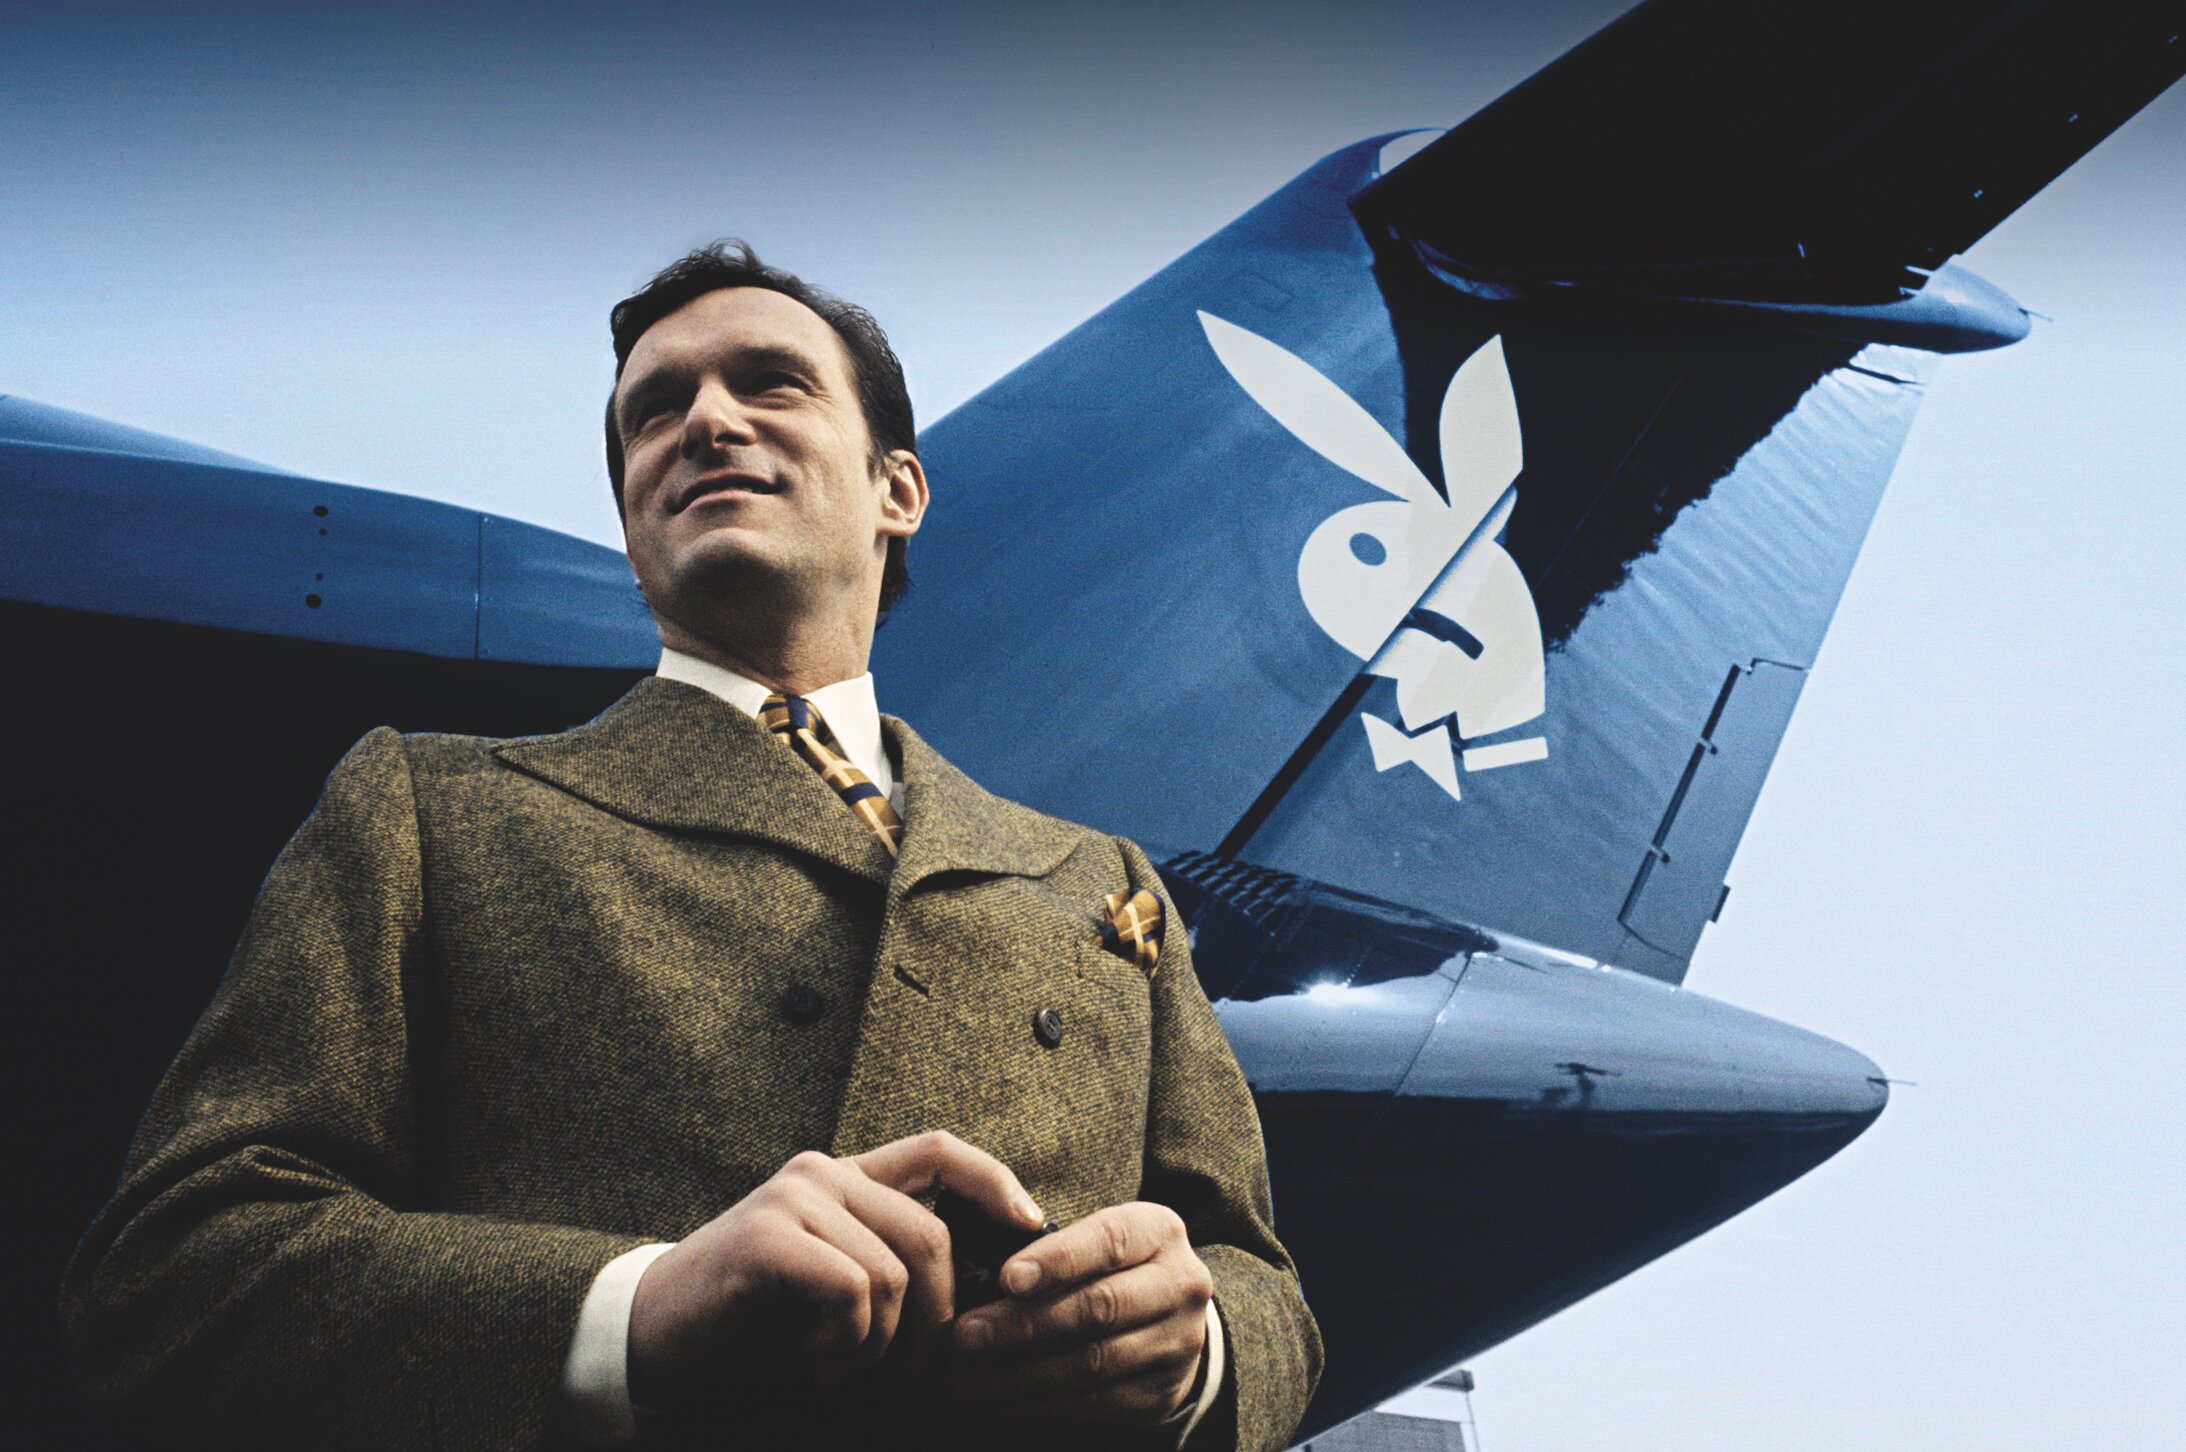 A young Hugh Hefner, the founder and EIC of Playboy magazine, by a Playboy plane